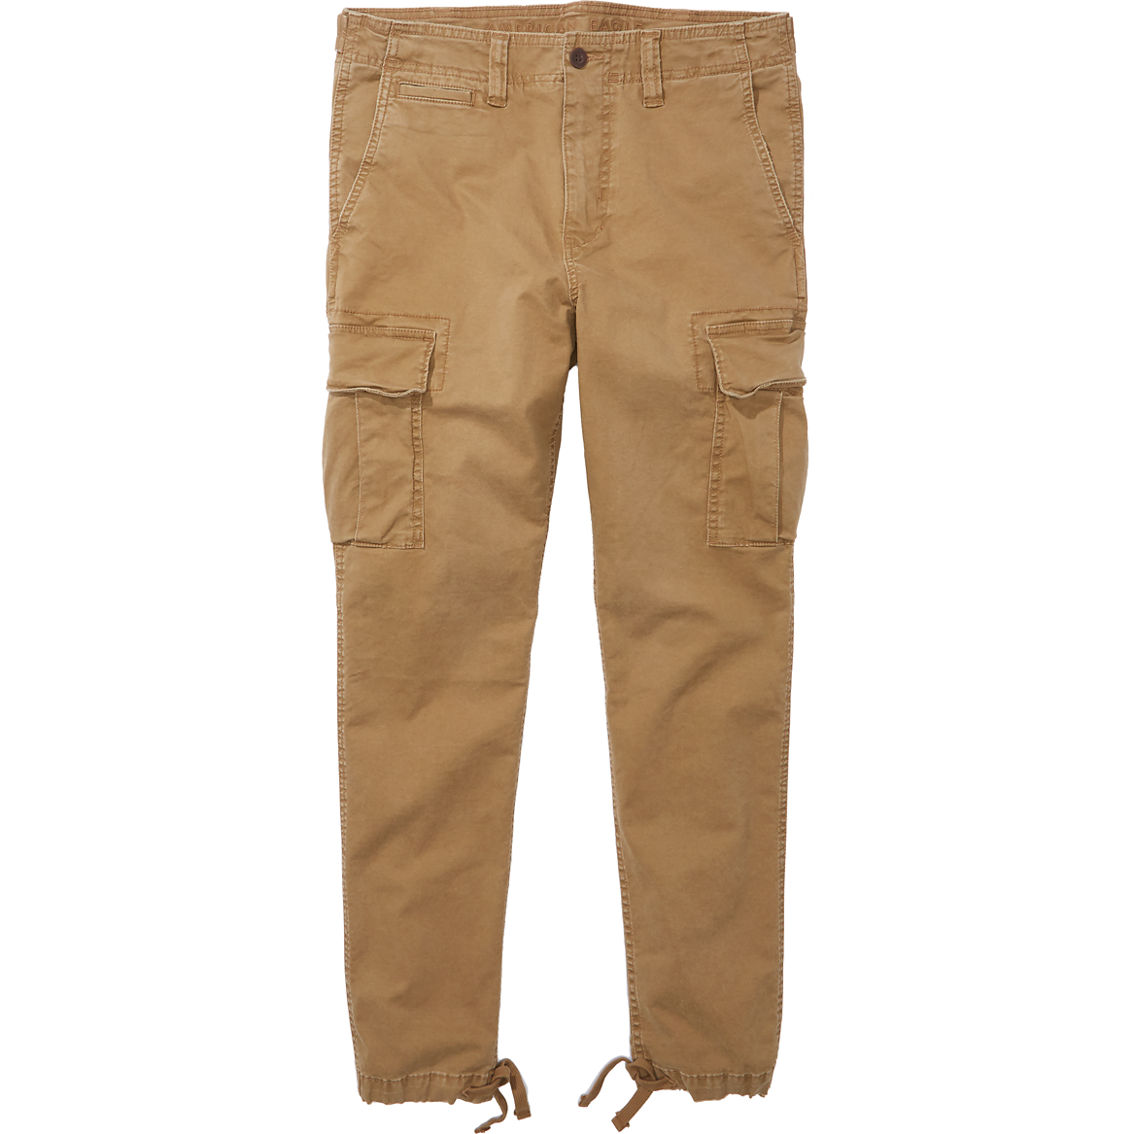 American Eagle Flex Slim Lived-In Cargo Pants - Image 4 of 5